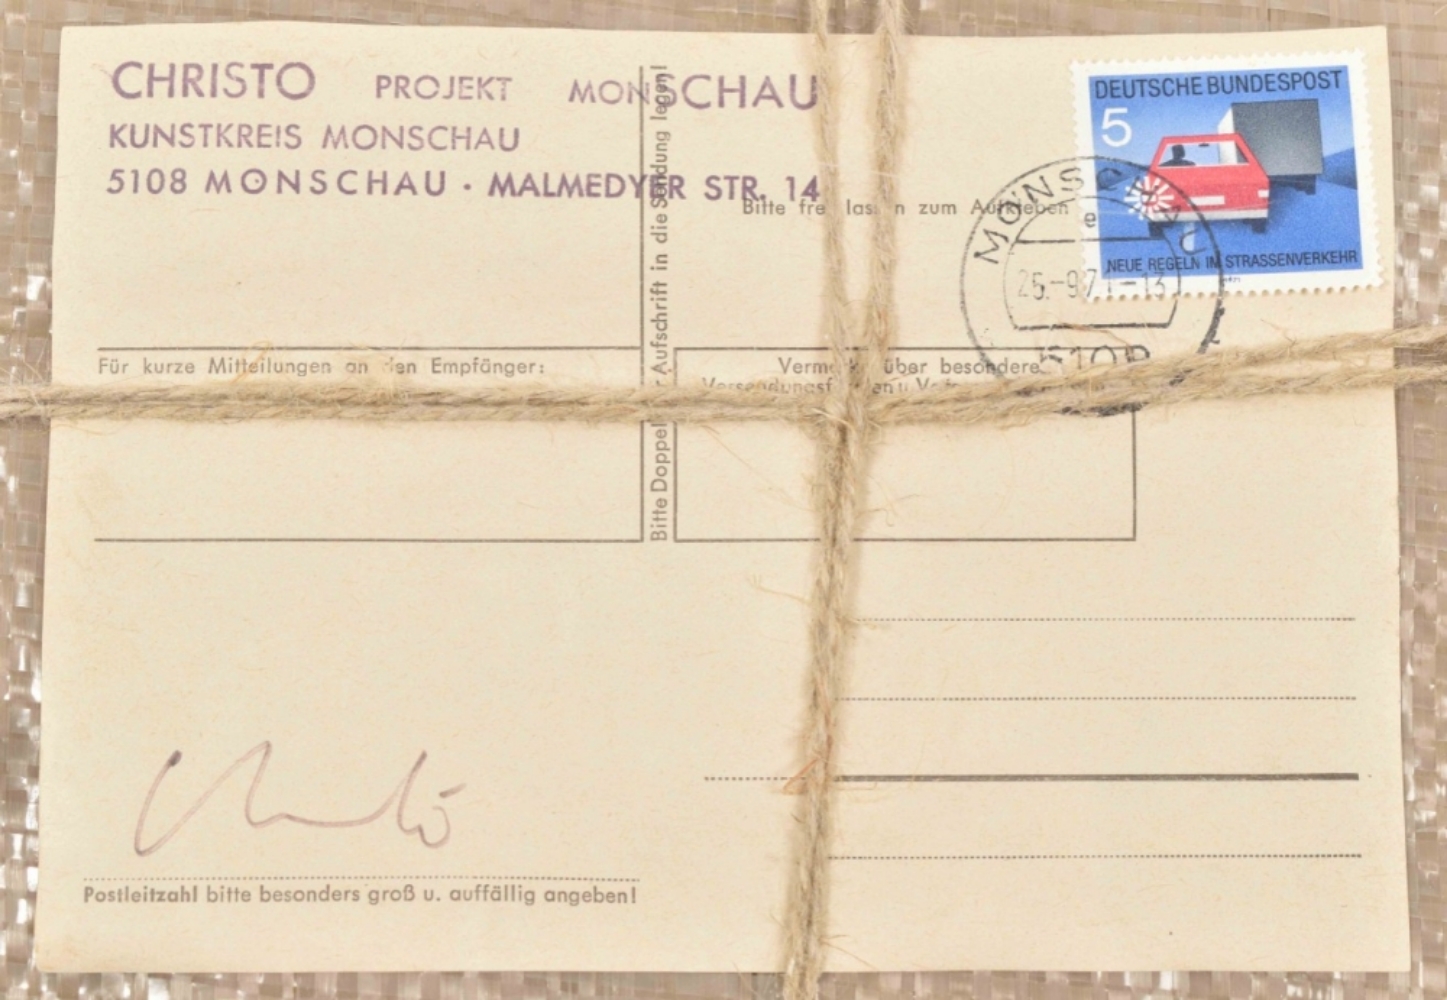 Christo, Do-it-Yourself Catalogue for the Monschau Project, 1971 - Image 3 of 4